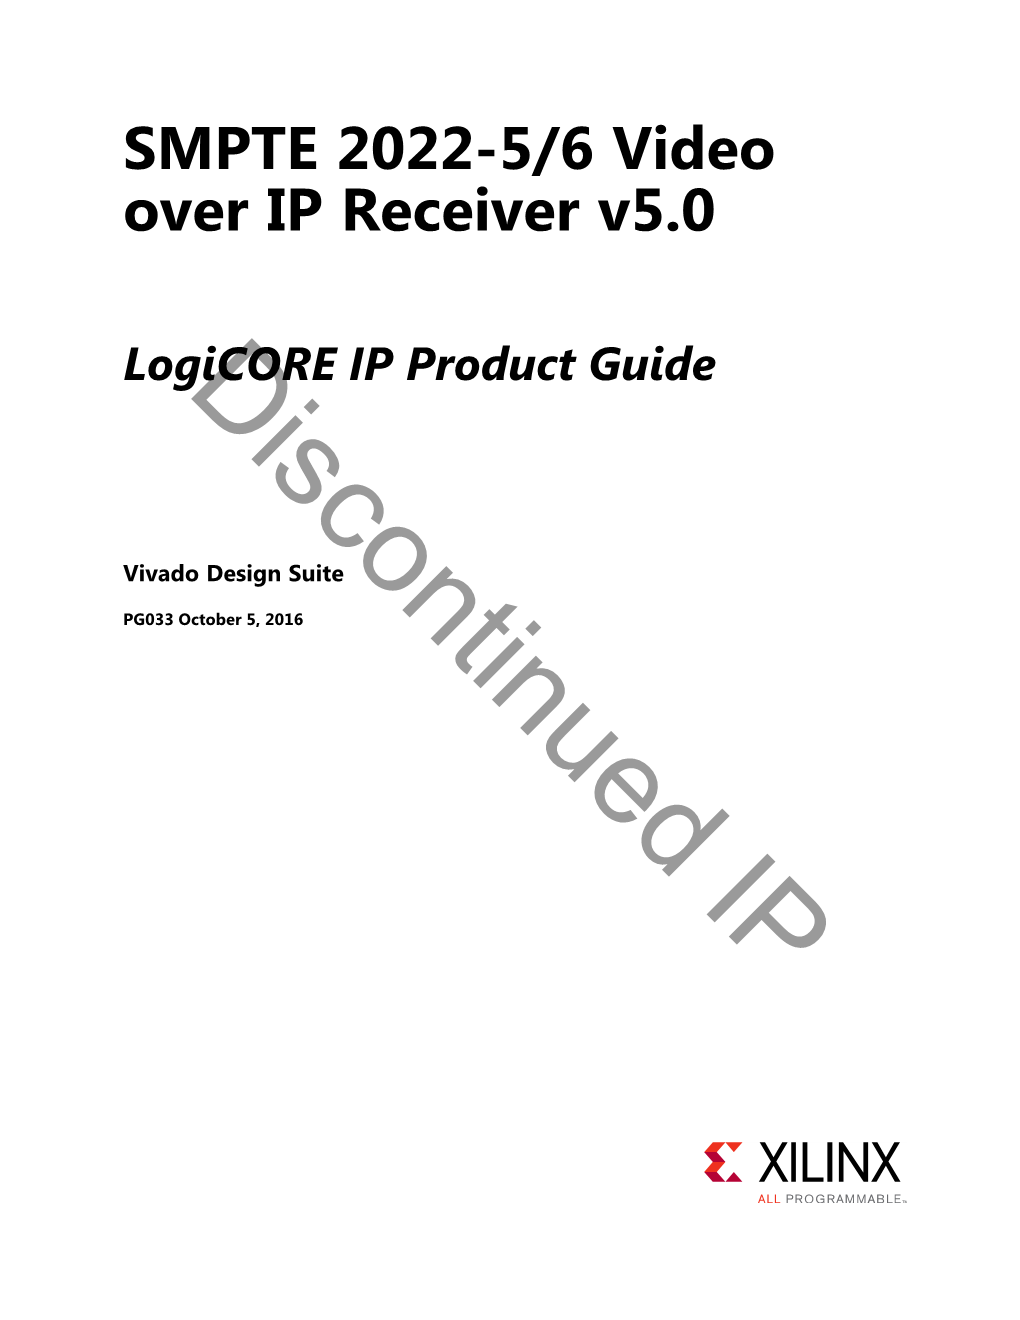 SMPTE 2022-5/6 Video Over IP Receiver V5.0 Logicore IP